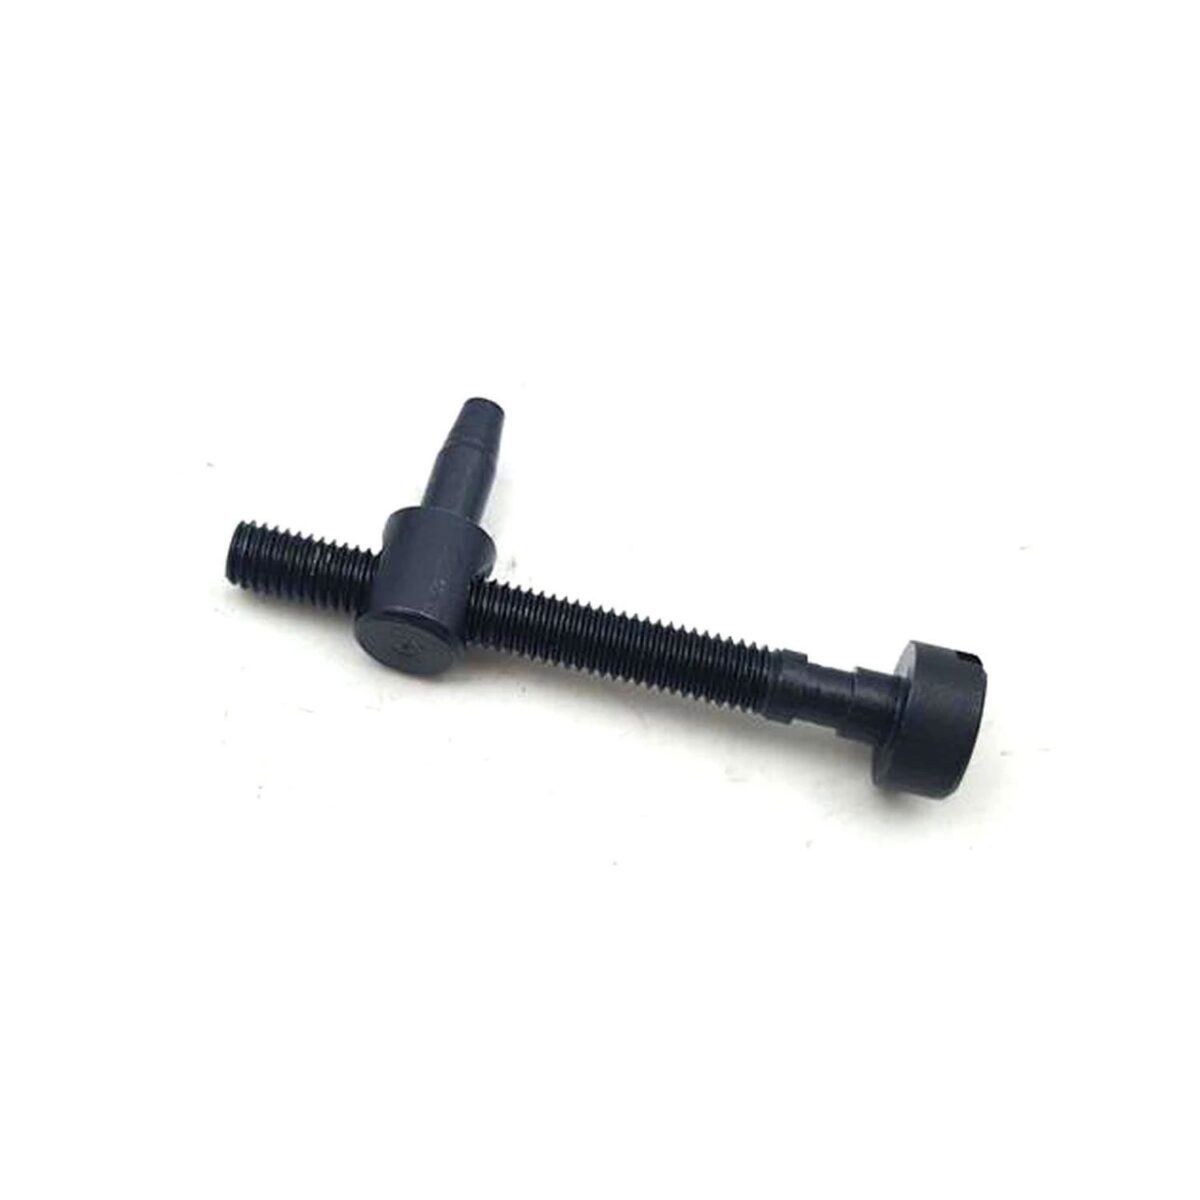 Chain Tensioner Part for Chainsaw 62cc Model